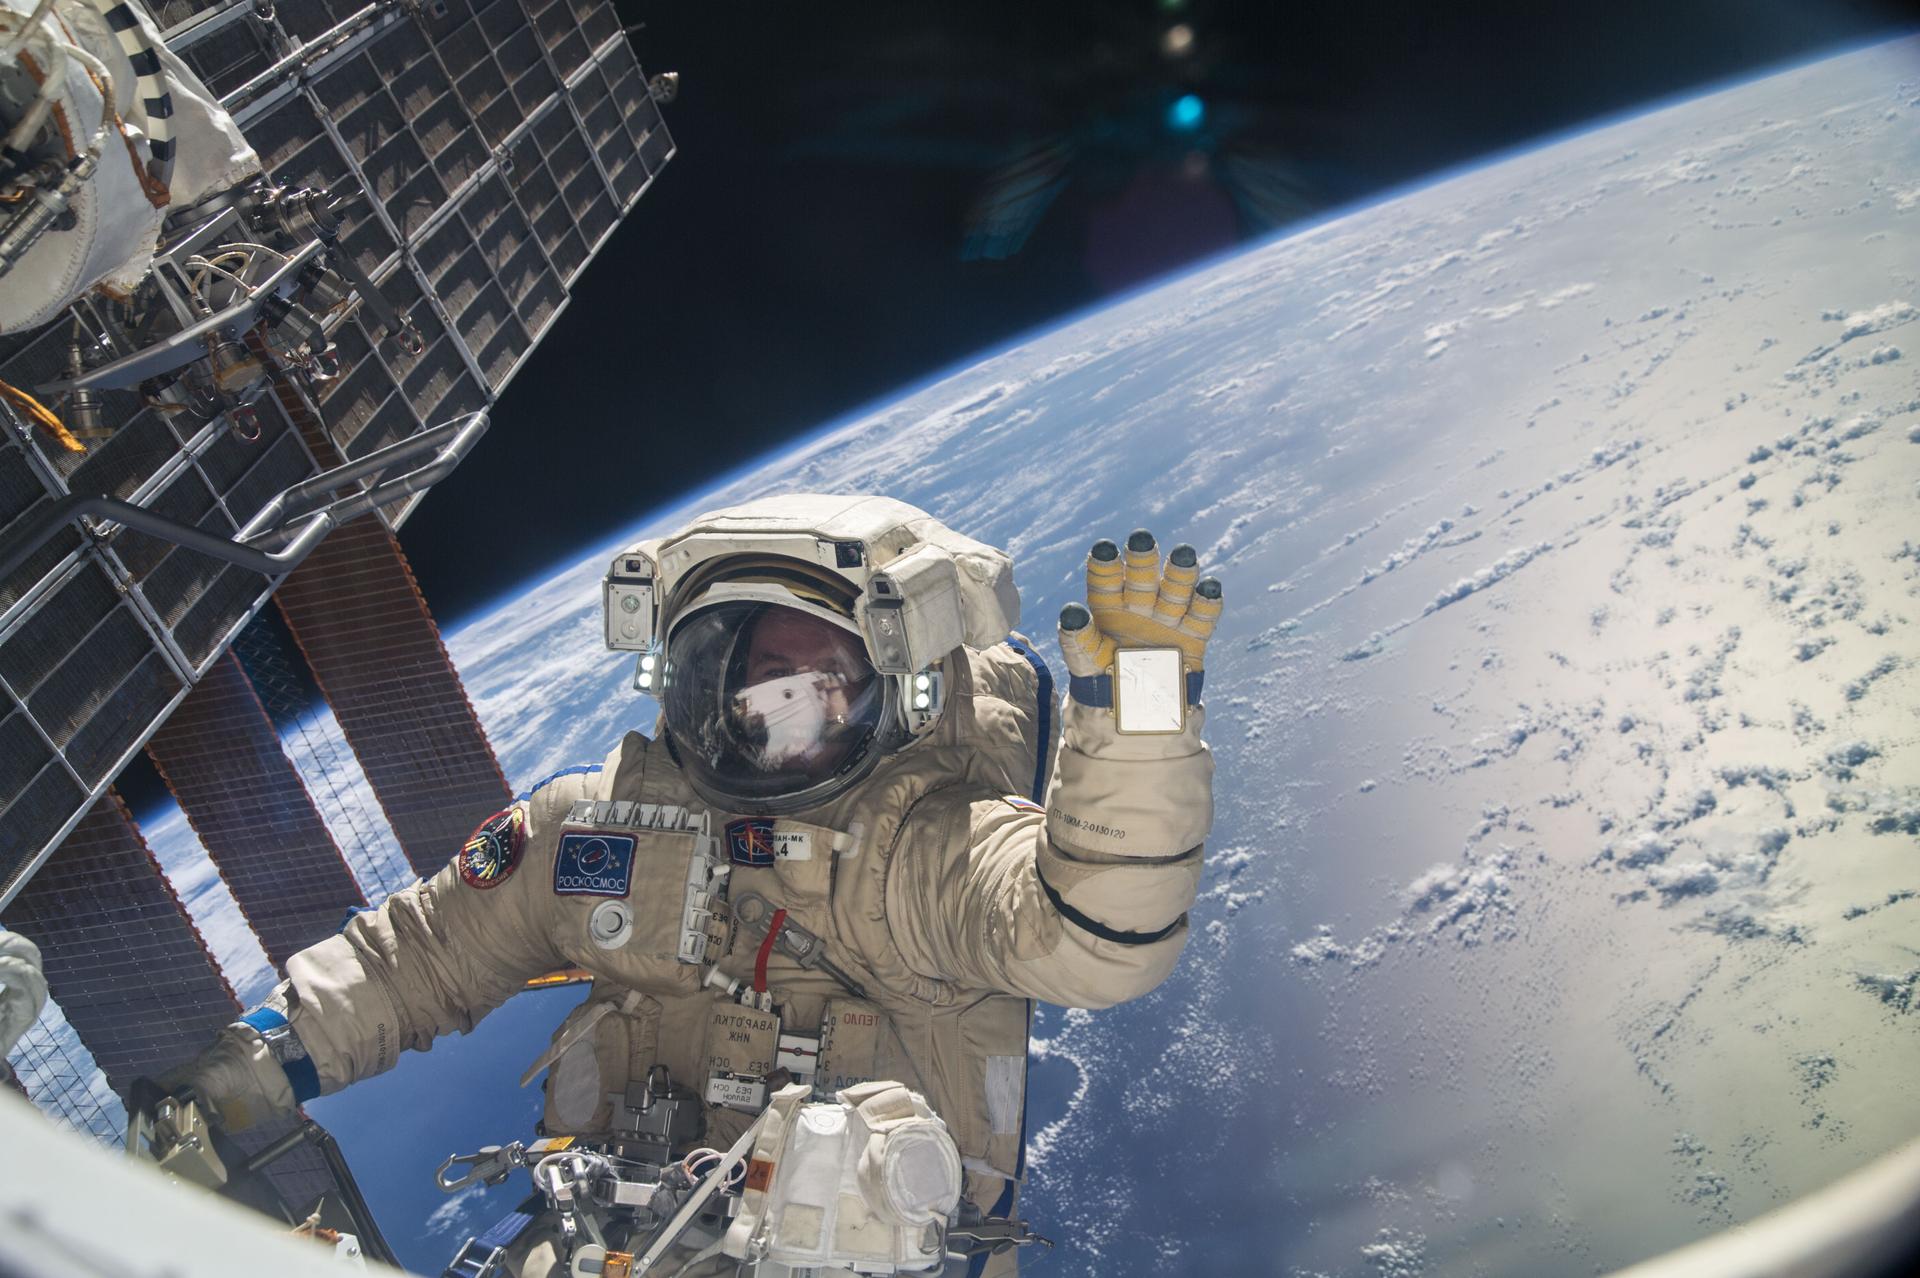 Russian cosmonaut Sergey Ryazanskiy is pictured during a session of extravehicular activity (EVA) in support of assembly and maintenance on the International Space Station. 